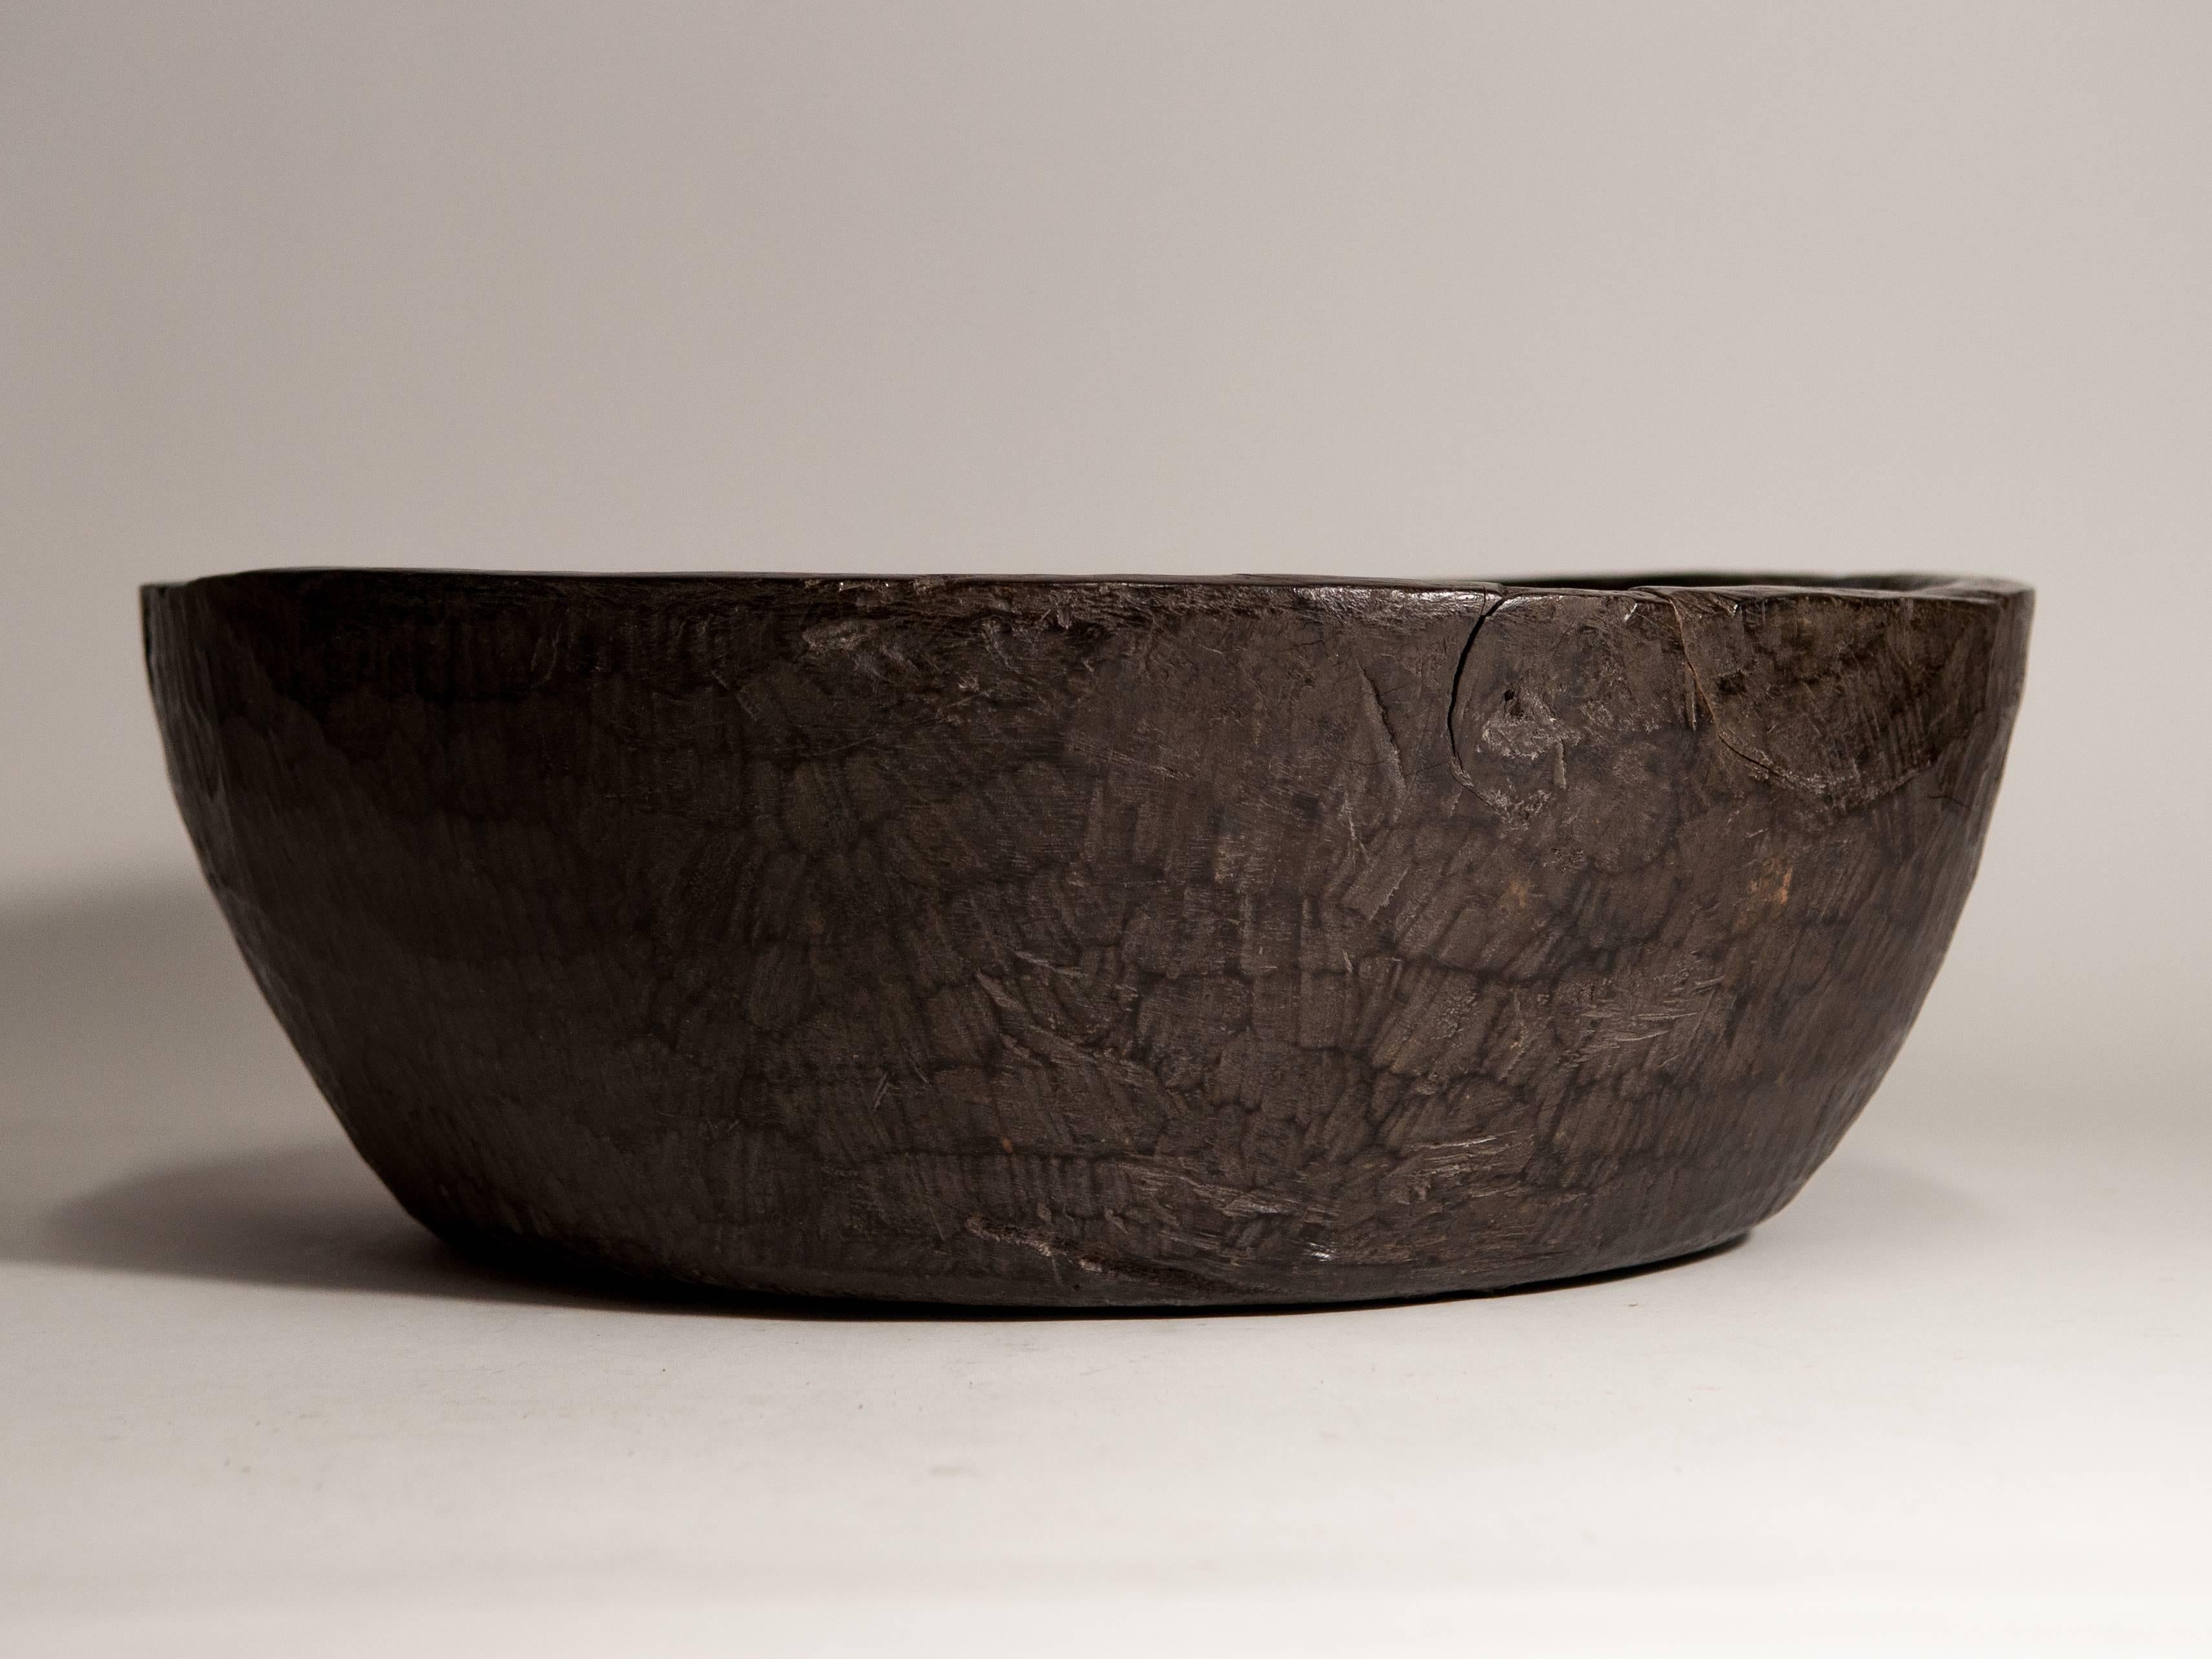 Large tribal ironwood bowl from the Dayak of Borneo, mid-20th century.
This bowl is hand hewn from a single piece of very dense ironwood; beautiful in its simplicity.
Dimensions: 18 inch diameter by 6.5 inches tall.